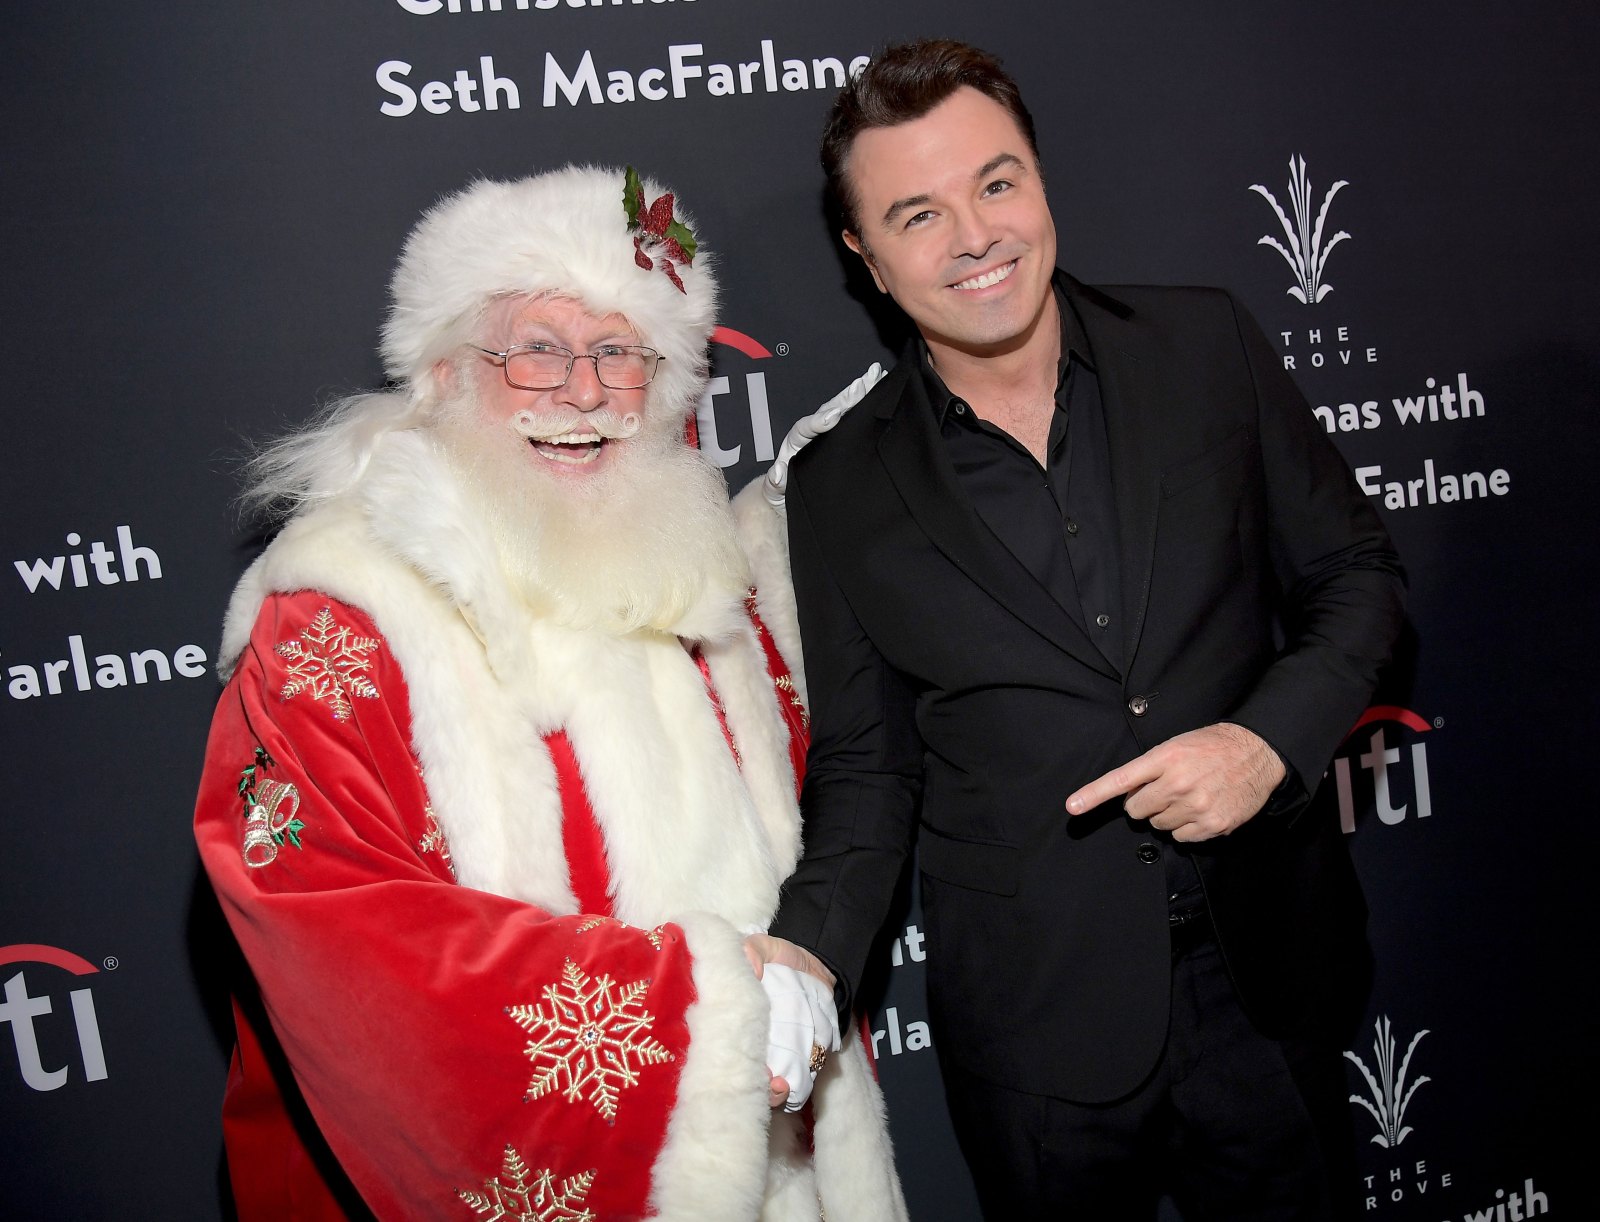 From Leo DiCaprio to Nick Viall: Inside Seth MacFarlane’s Christmas Party